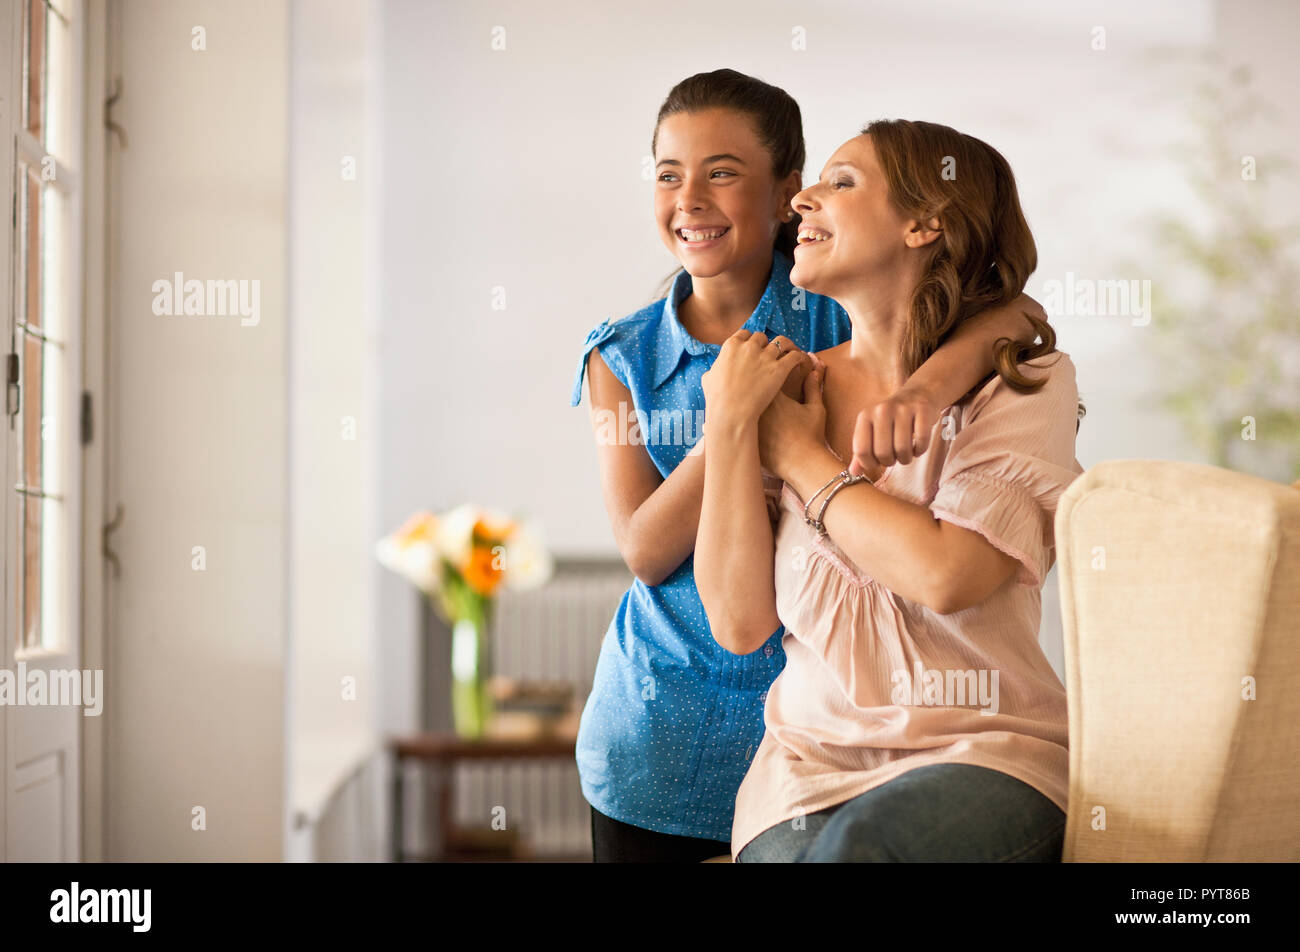 Portrait of woman at home with her daughter. Stock Photo